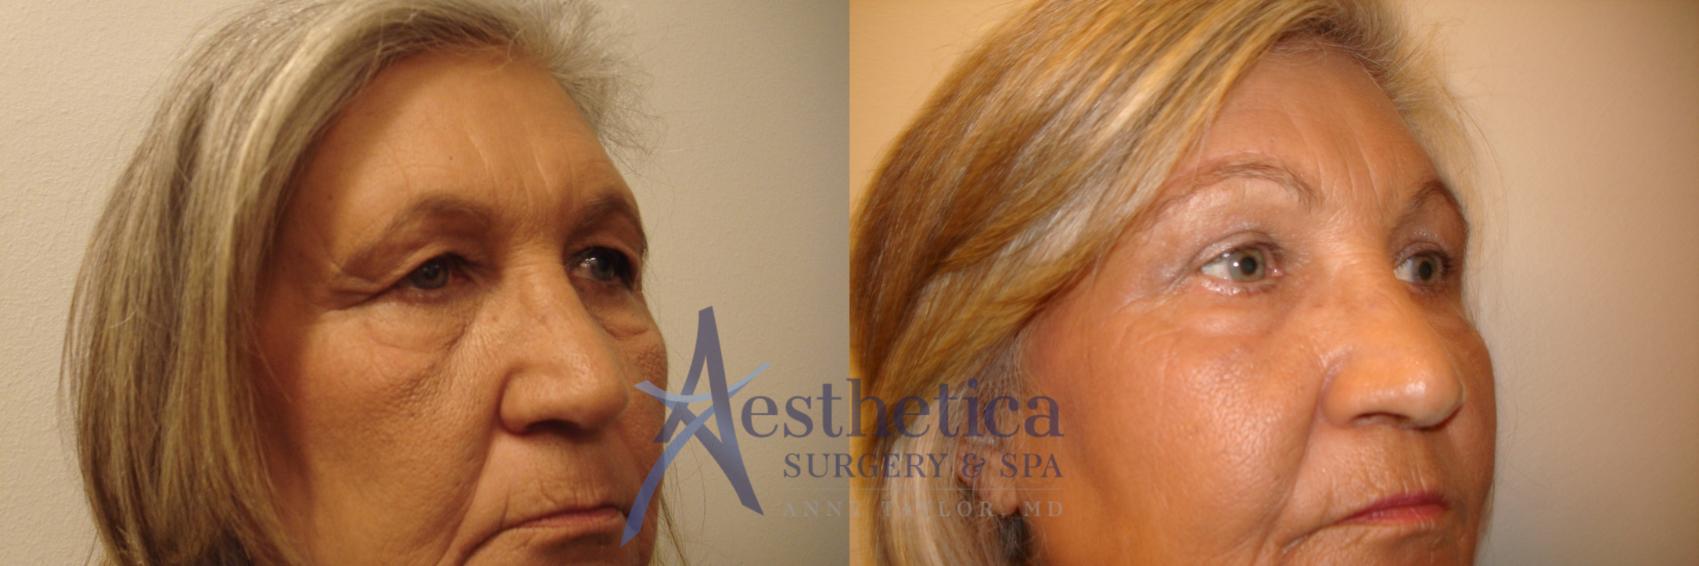 Blepharoplasty (Eyelid Surgery) Case 627 Before & After Right Oblique | Worthington, OH | Aesthetica Surgery & Spa